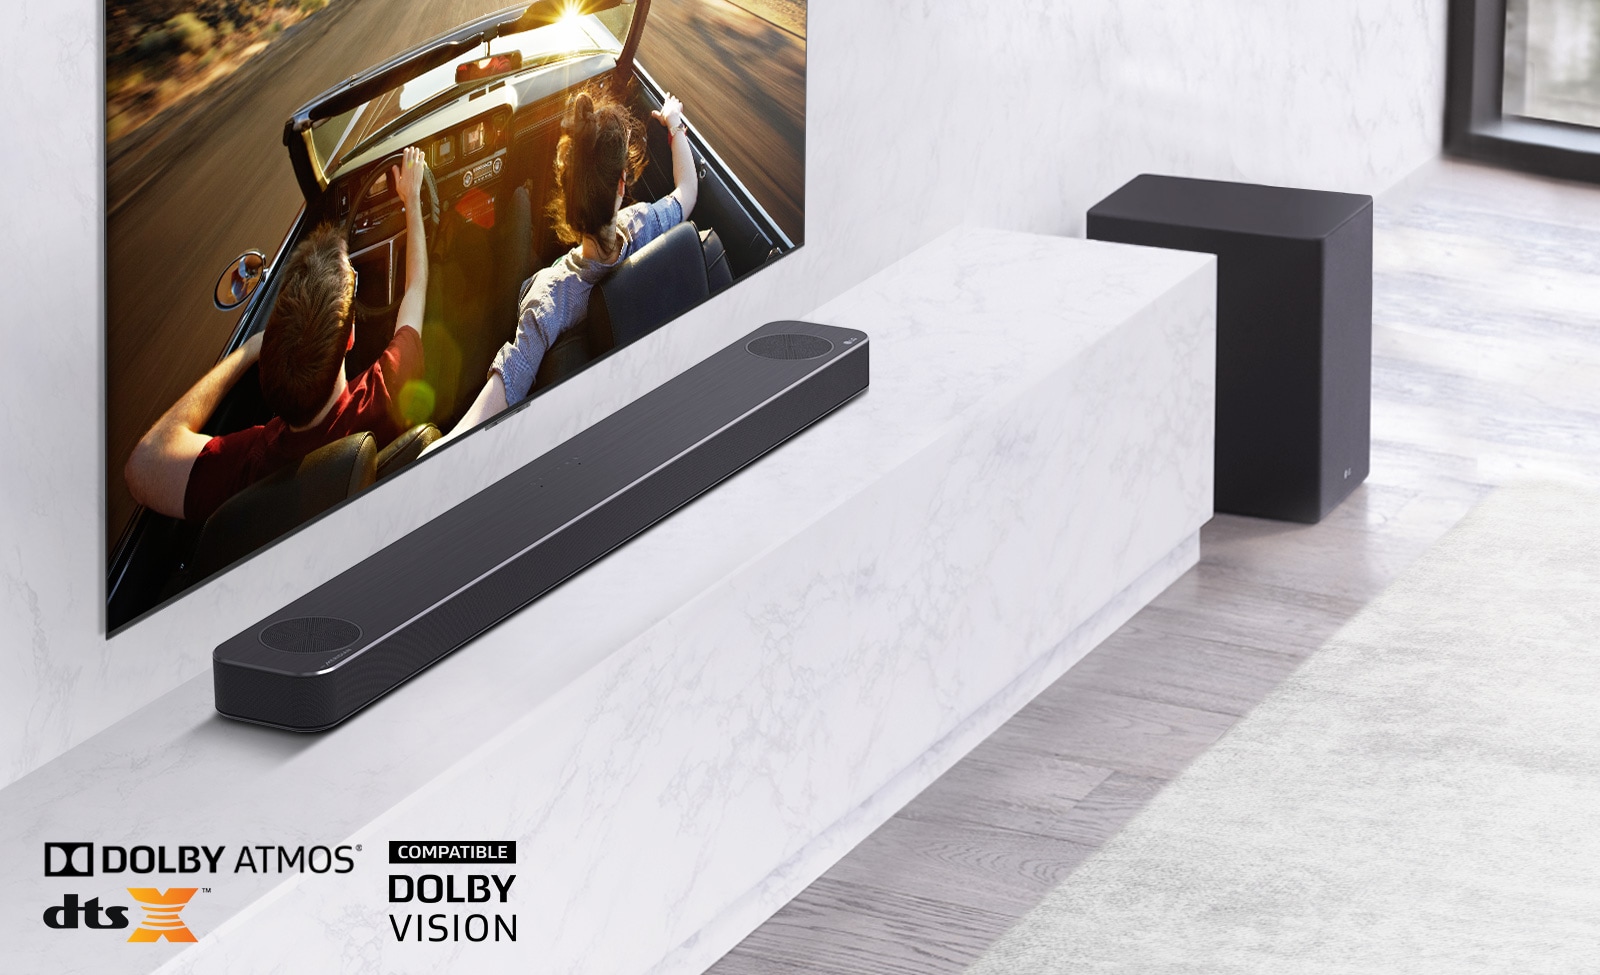 TV is on the wall, LG Soundbar is below on a white marble shelf with a sub-woofer to the right. TV shows a couple in a car. 